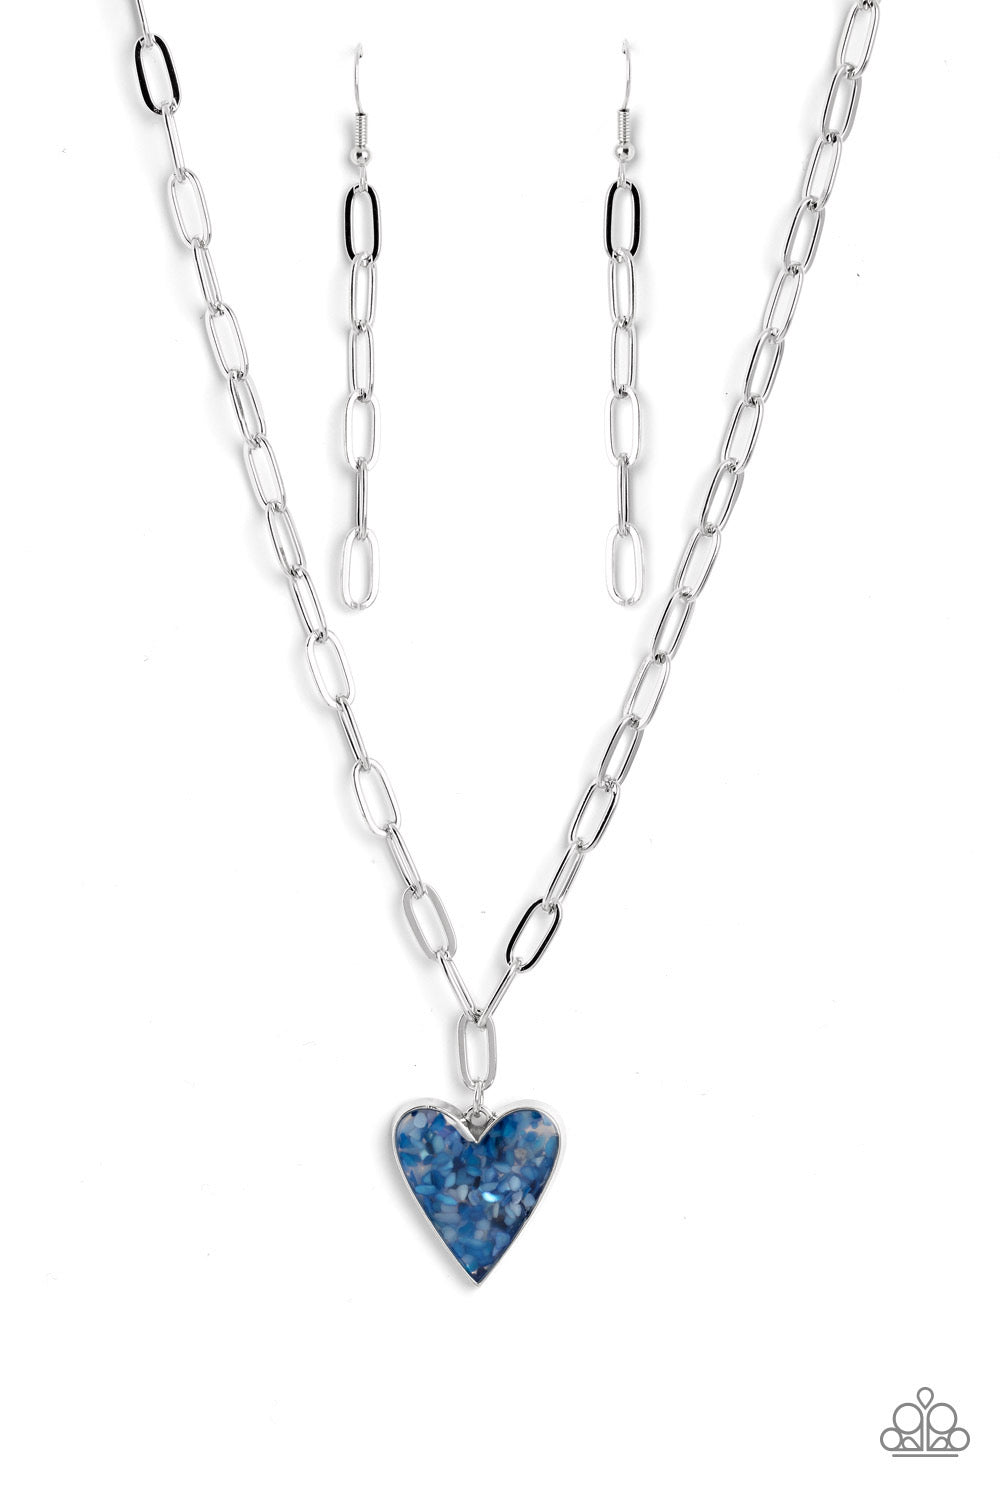 Paparazzi Kiss and SHELL - Blue Heart Necklace 